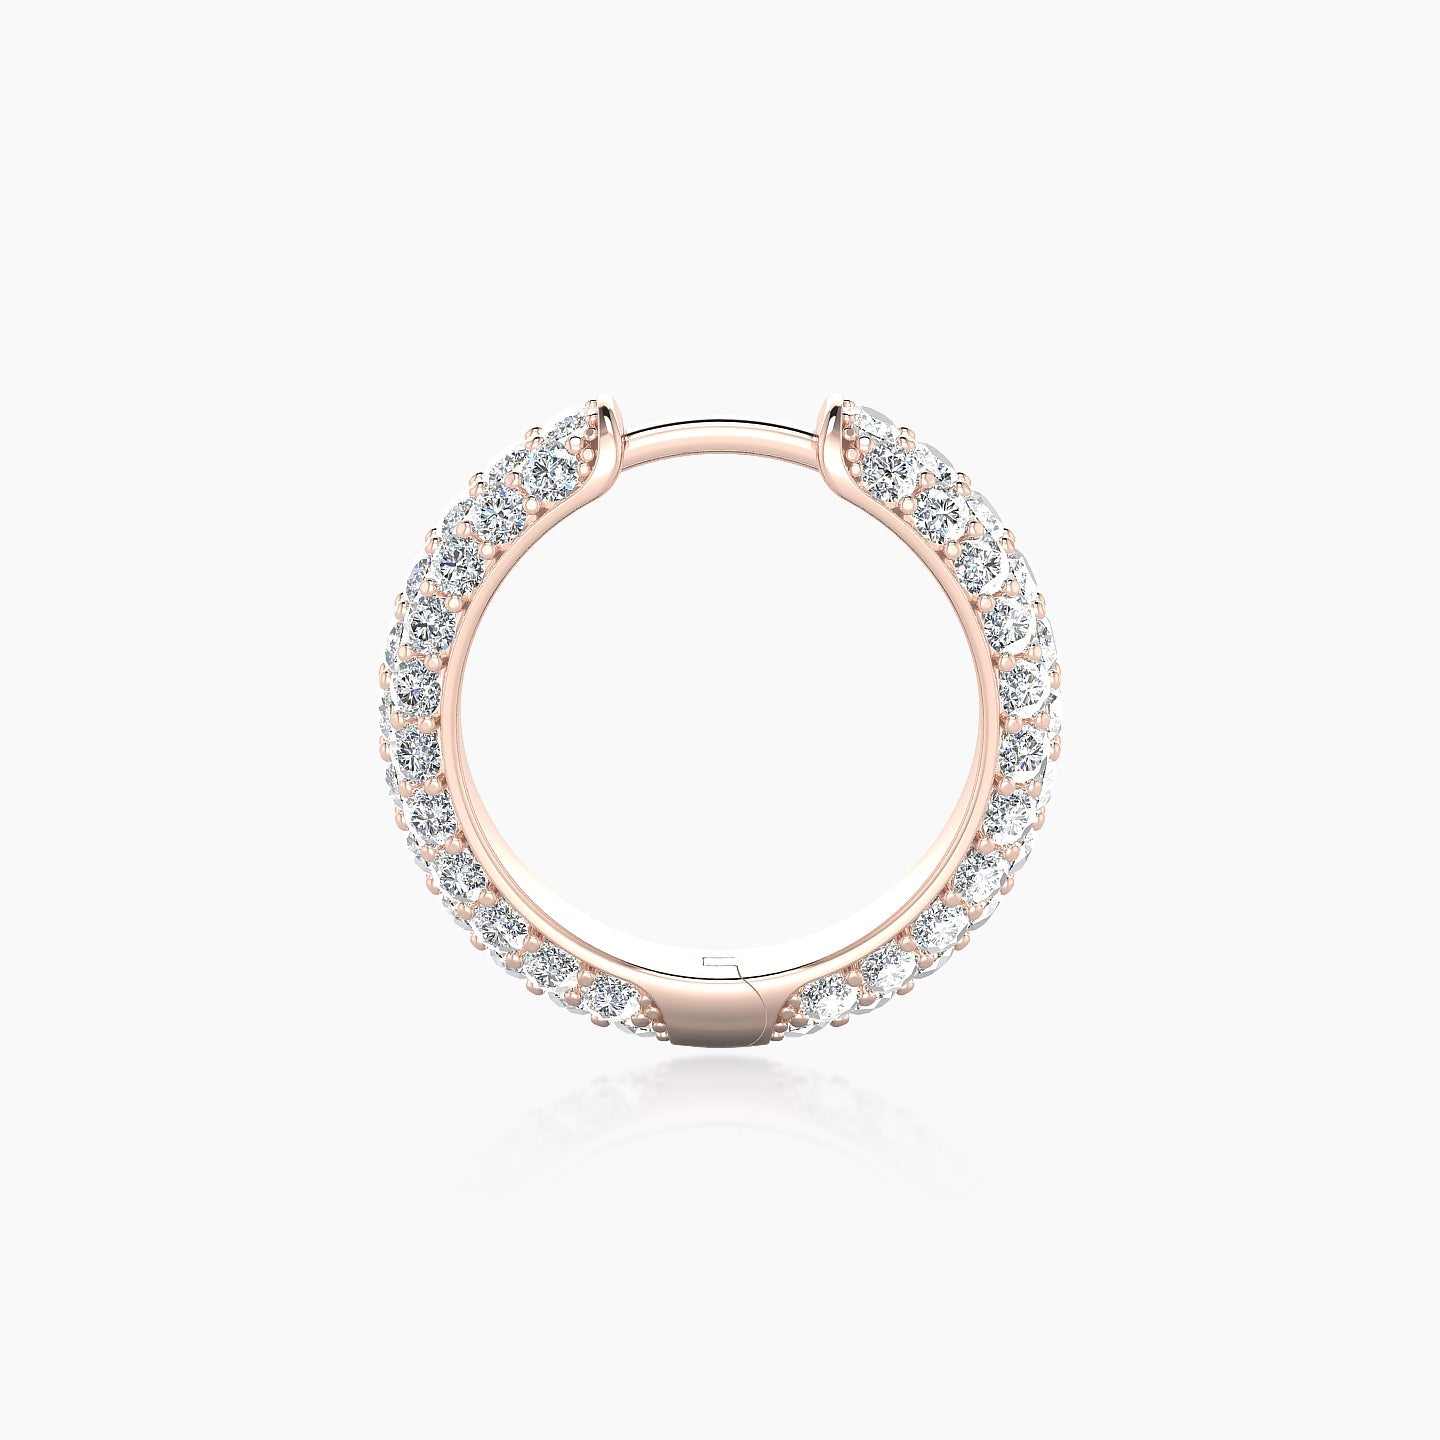 Theia | 18k Rose Gold 9.5 mm Pave Diamond Nose Ring Piercing